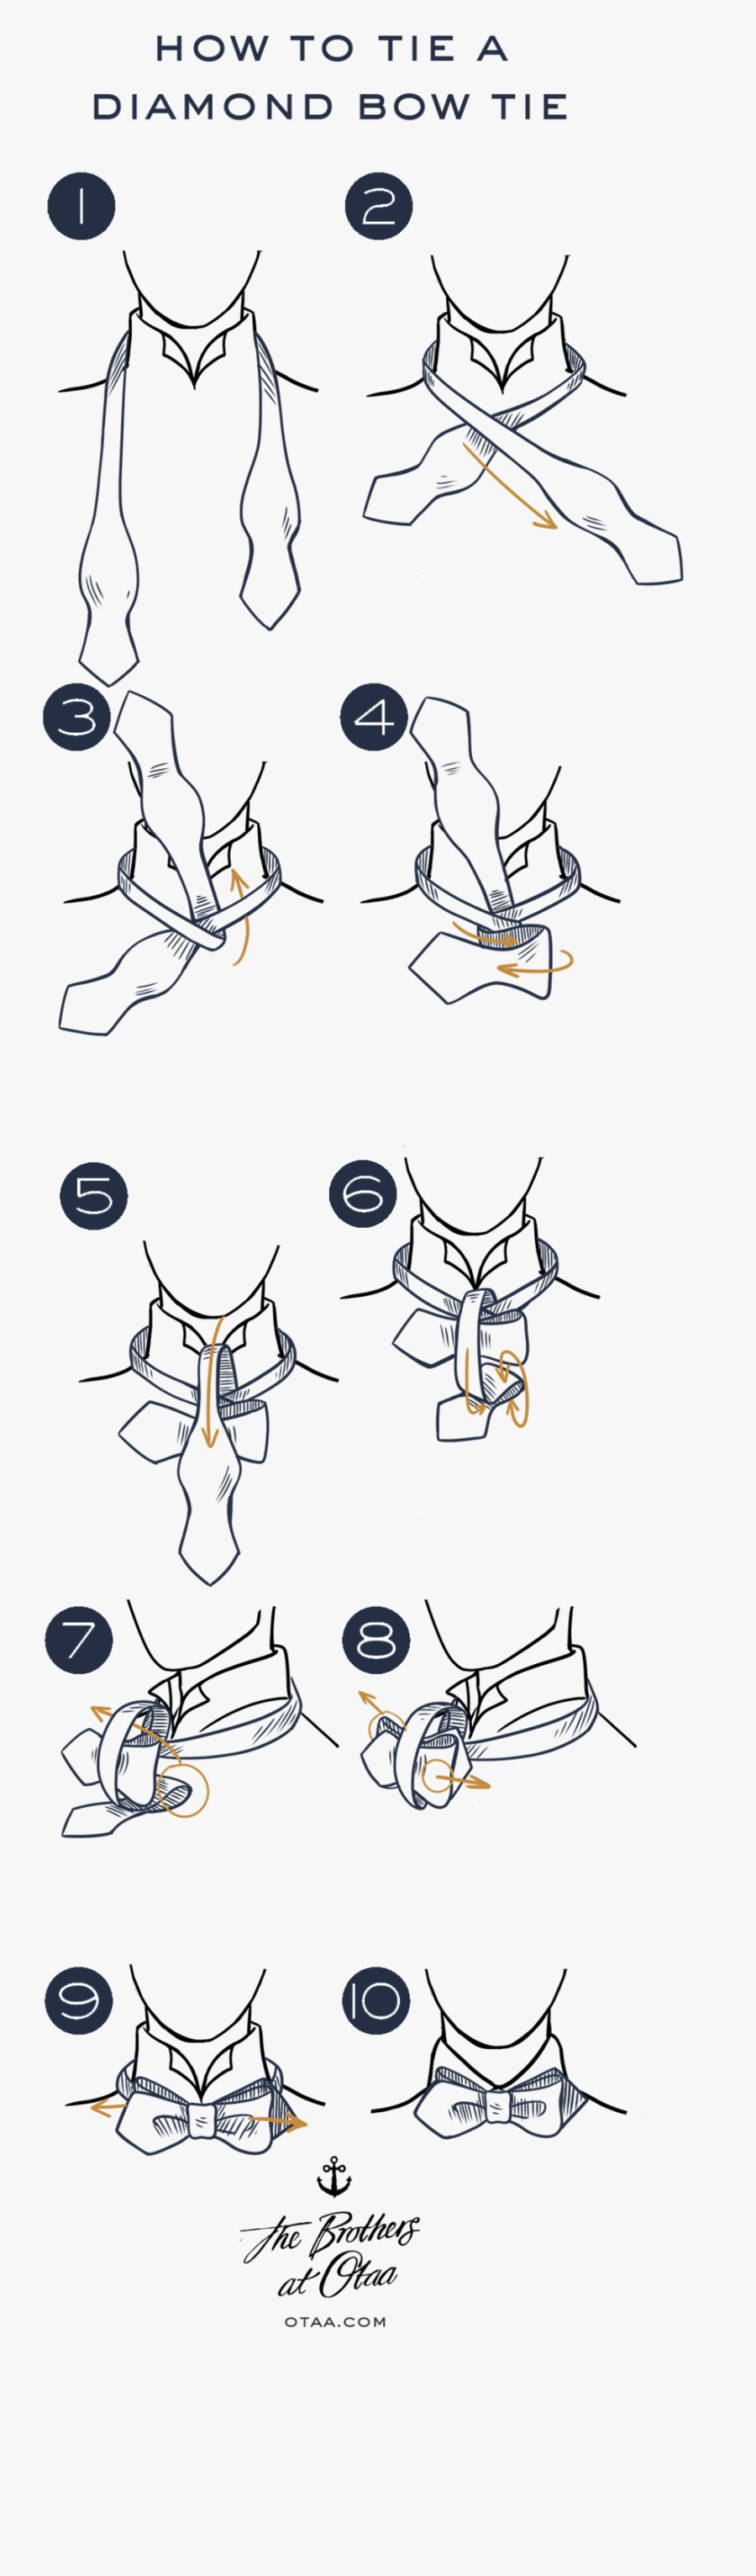 How To Tie A Diamond Bow Tie - Tying A Bow Tie, Transparent Clipart